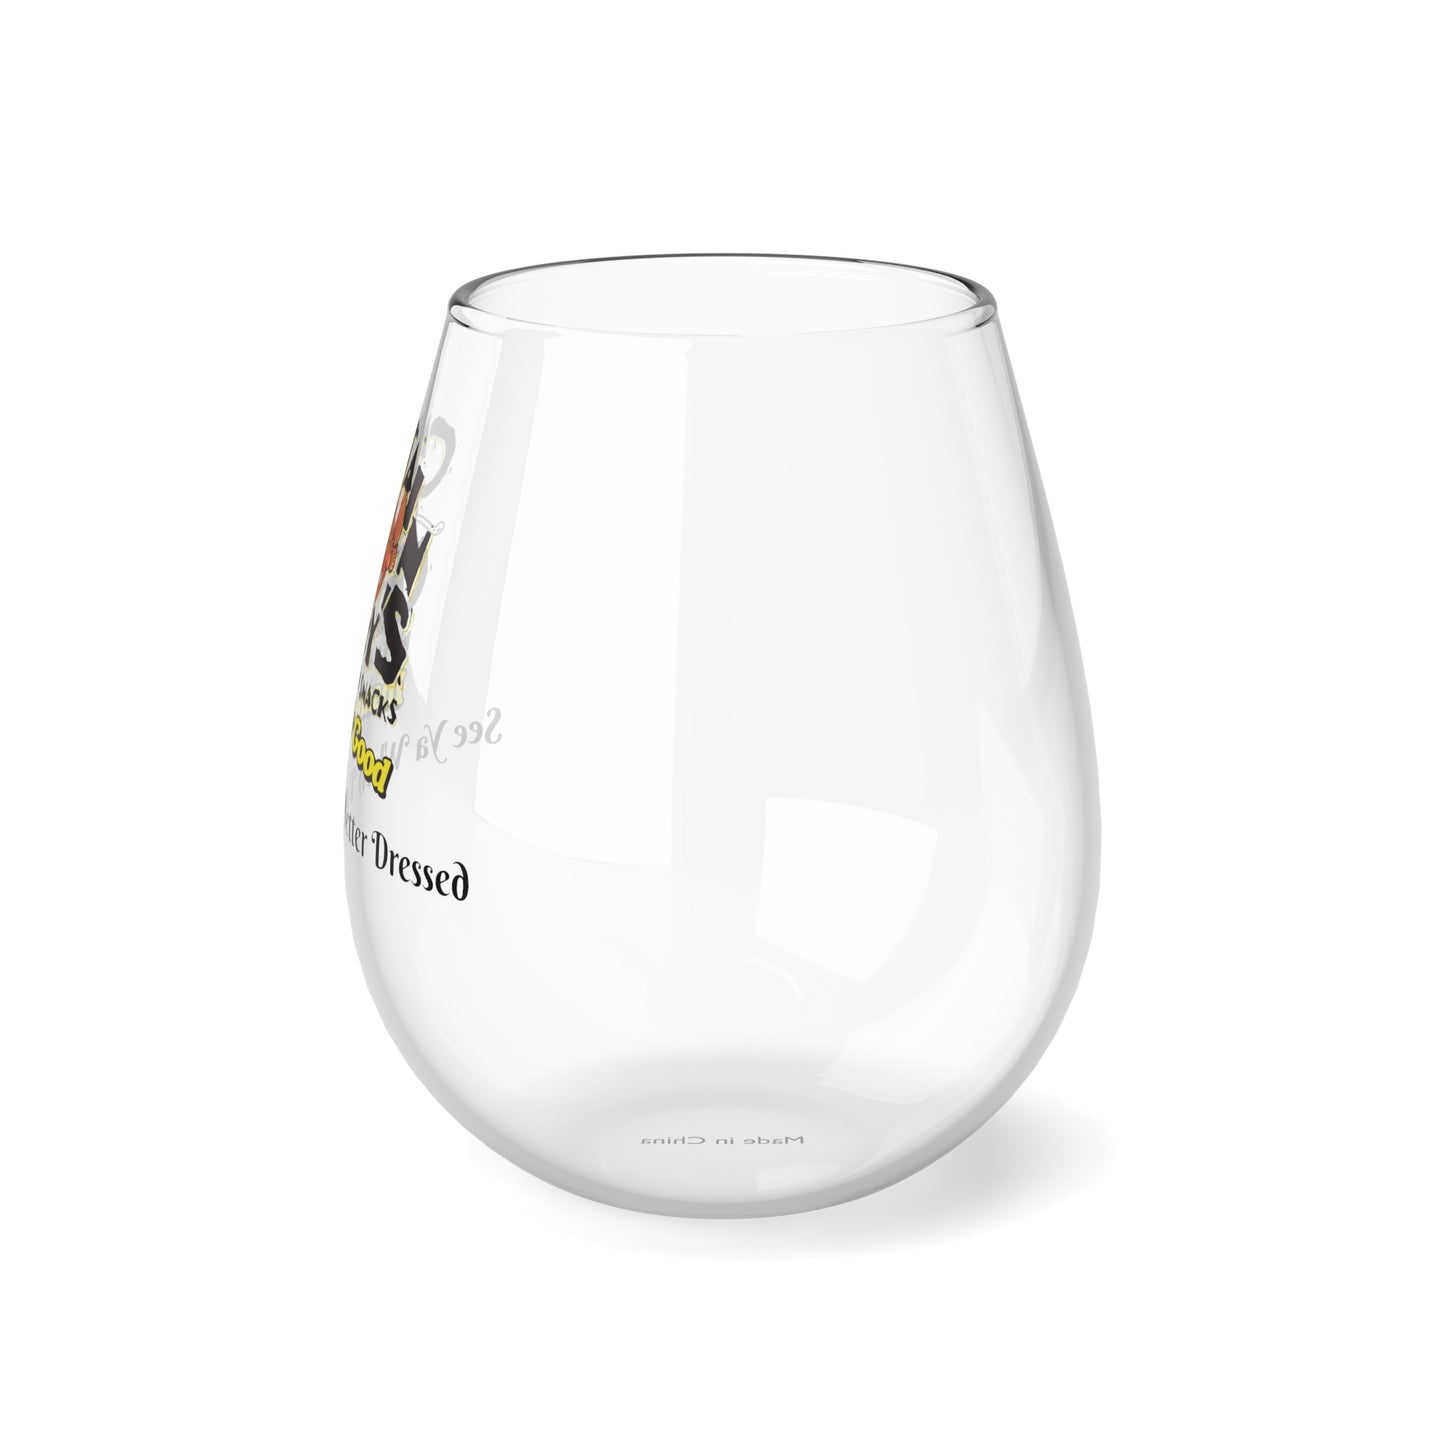 Captain Crazy's Stemless Wine Glass "See Ya When I'm Better Dressed!